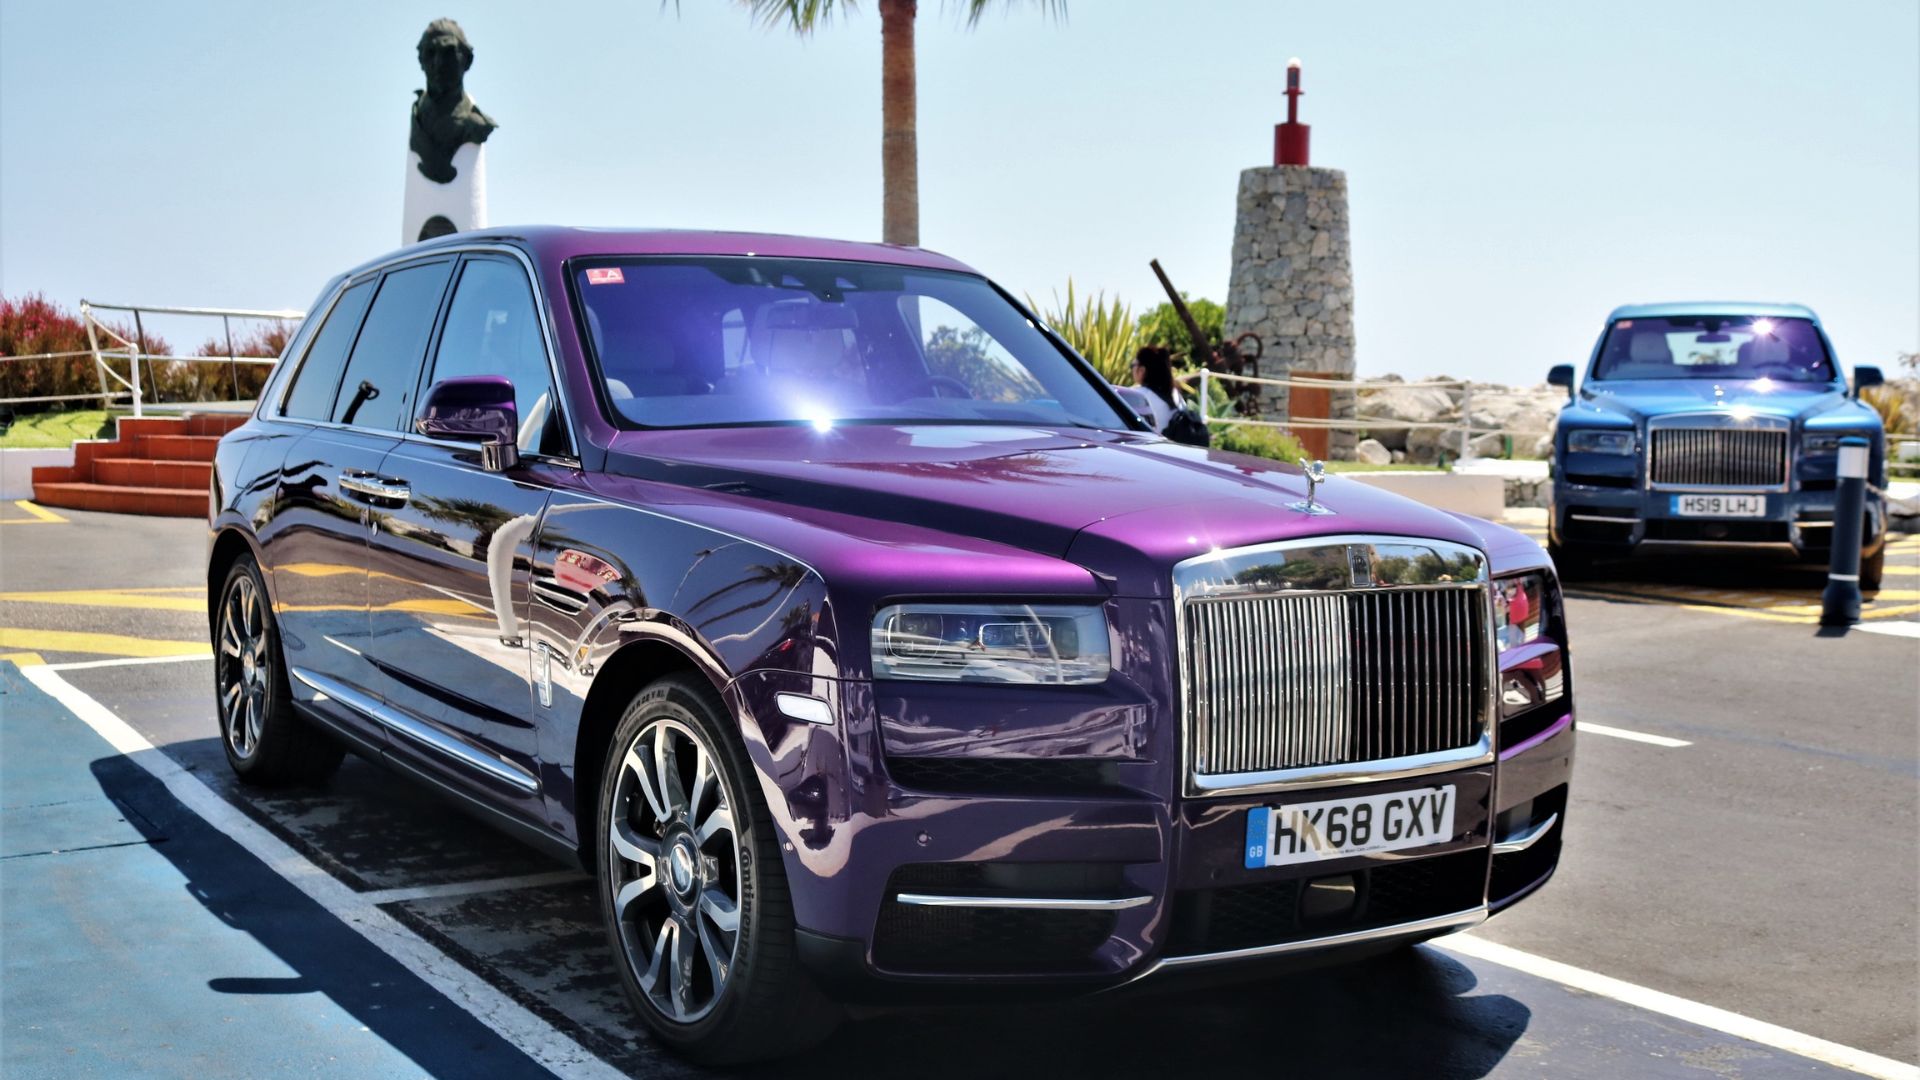 Why Is Thе Rolls Roycе Cullinan A Top Choicе For Dubai's Elitе